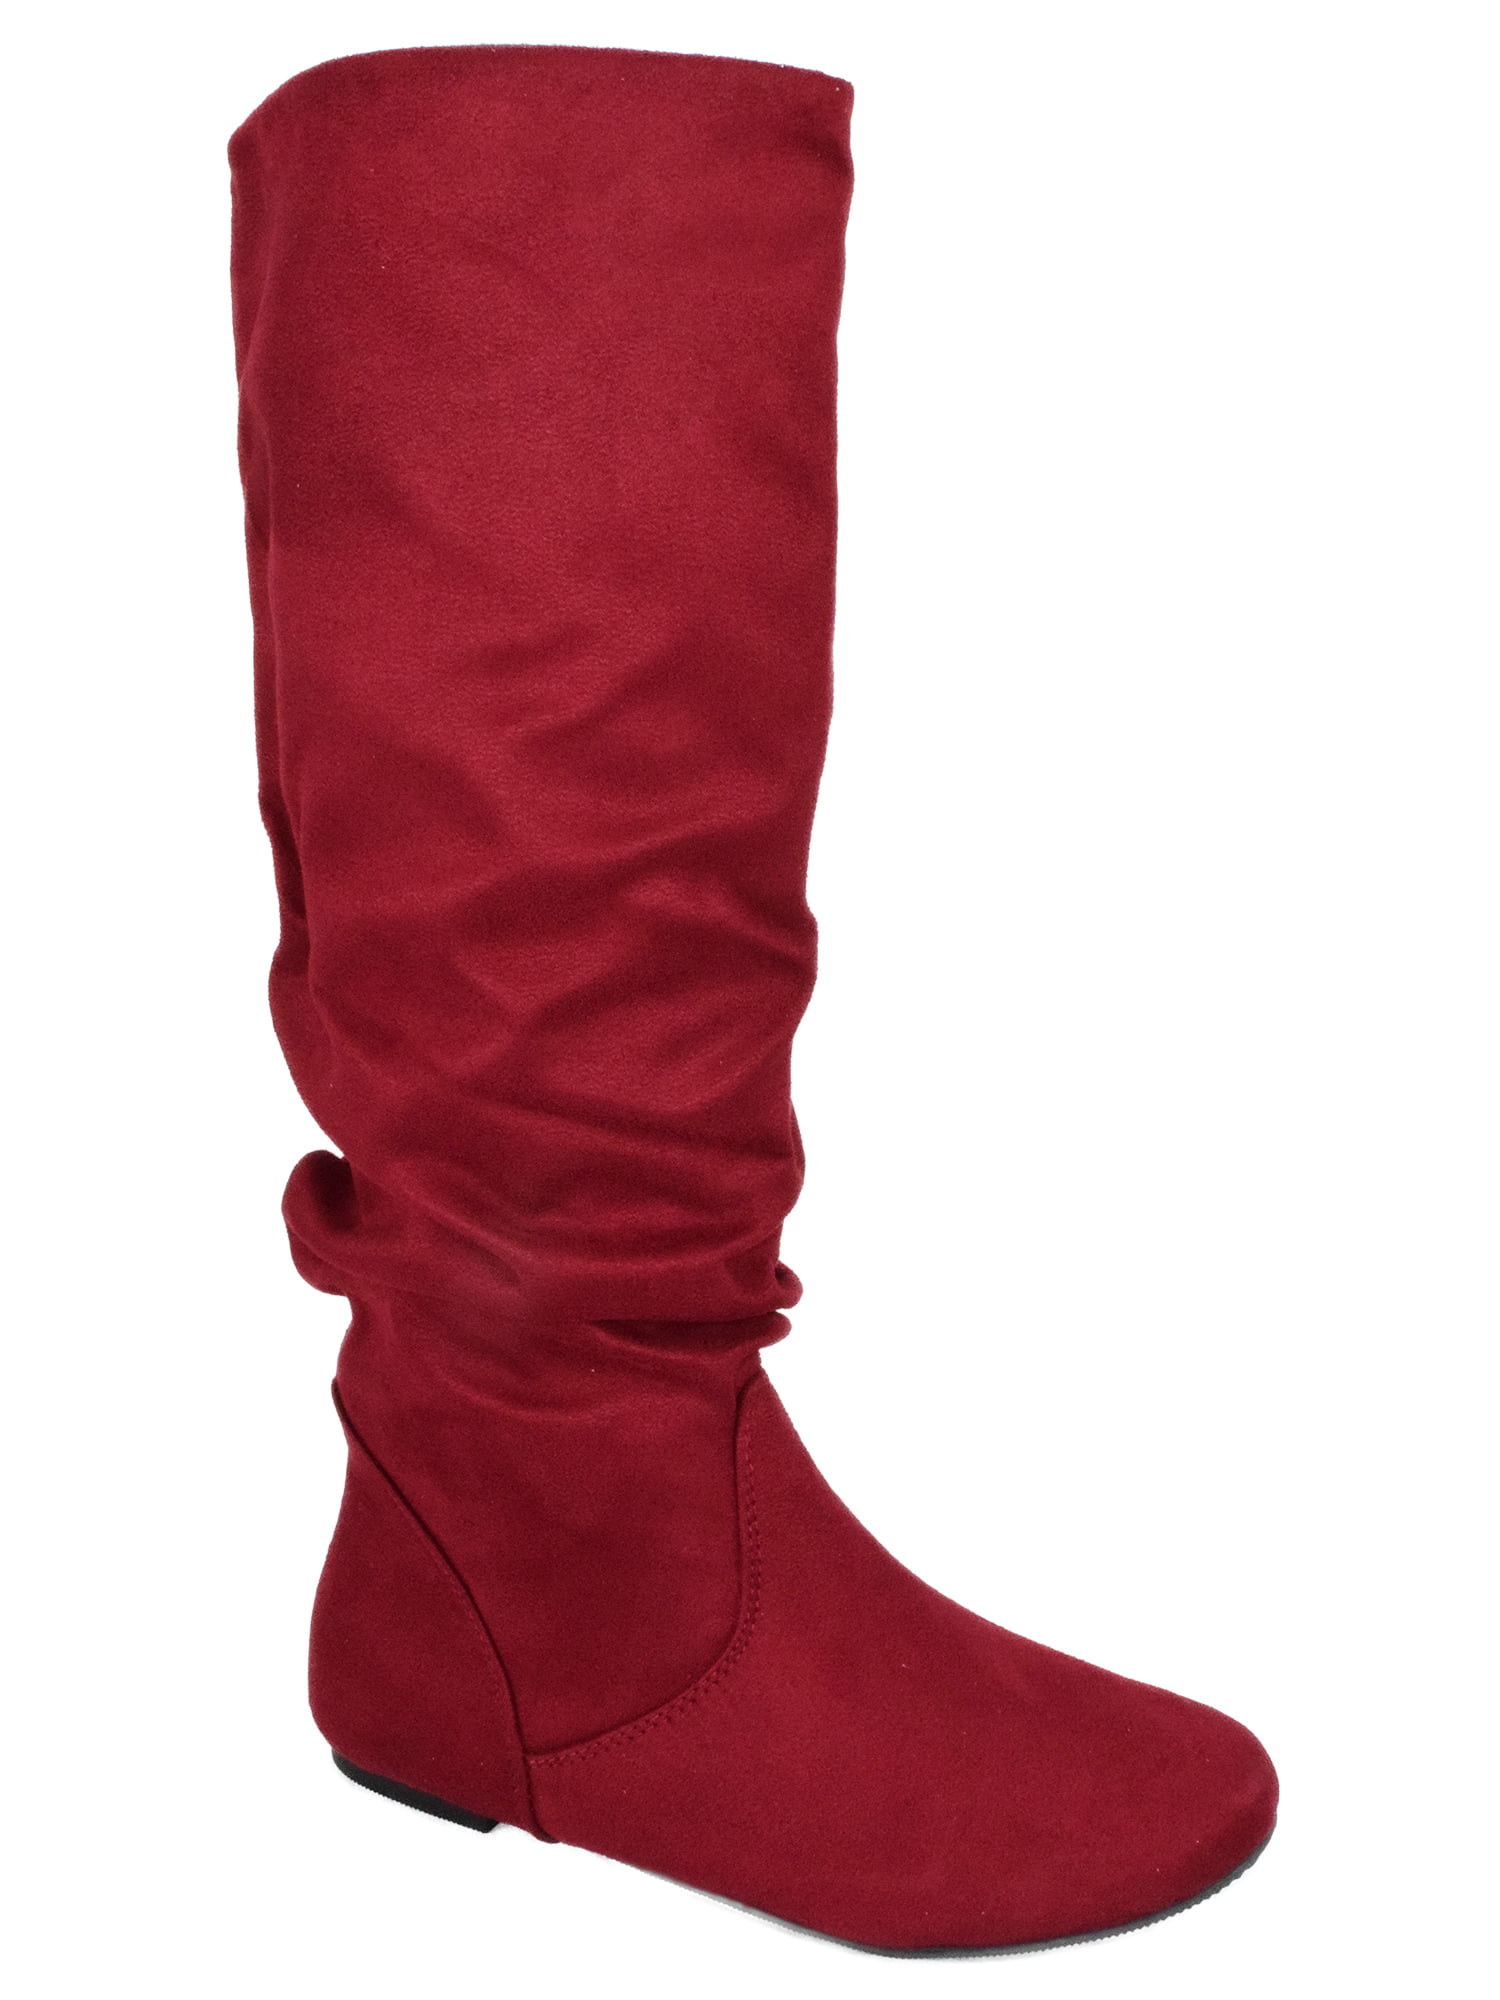 red knee high boots flat